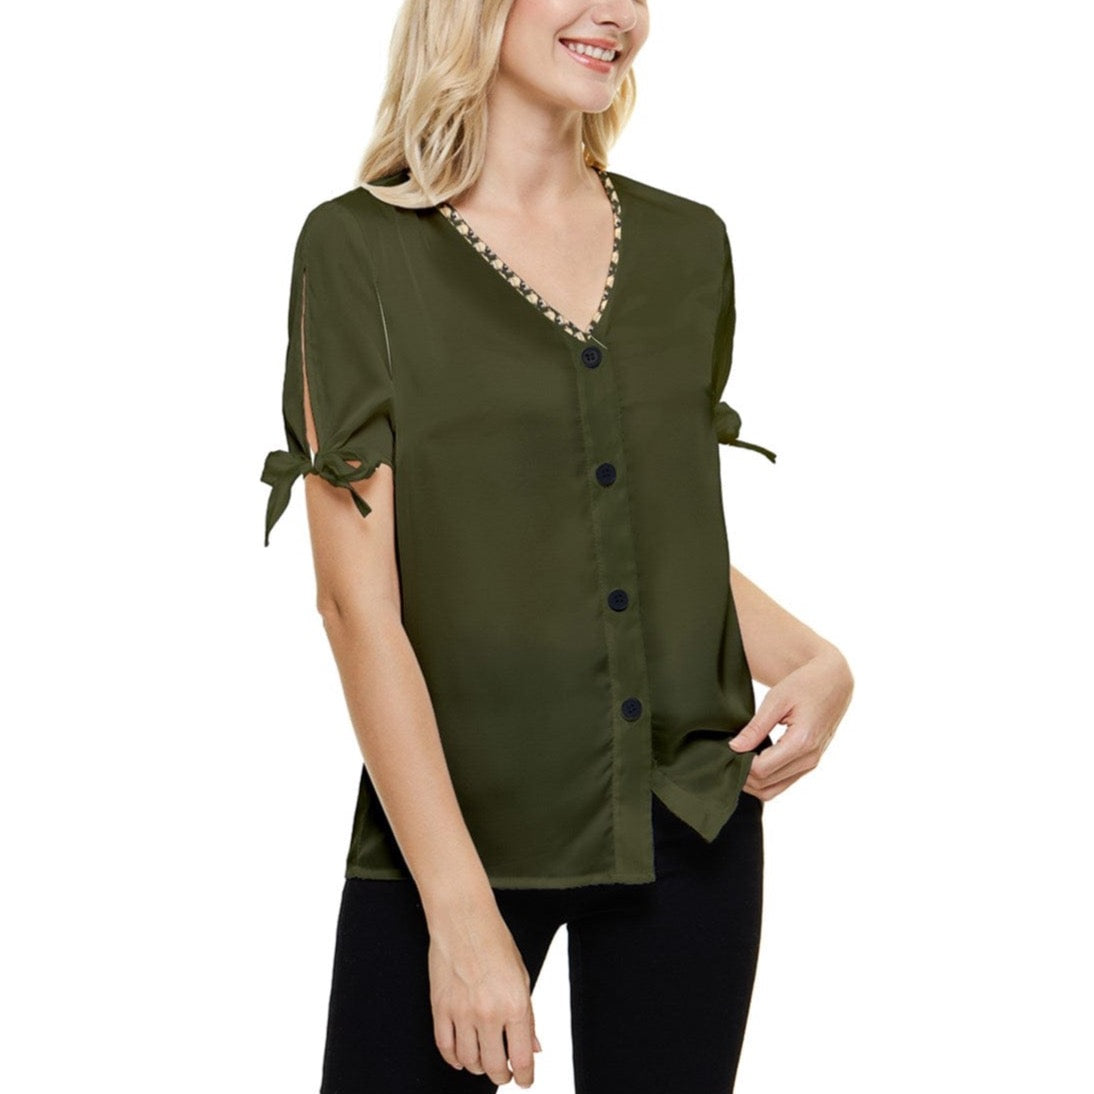 the-wheaten-store-women-s-bow-sleeve-button-up-top-green-button-down-shirts-33006171750597